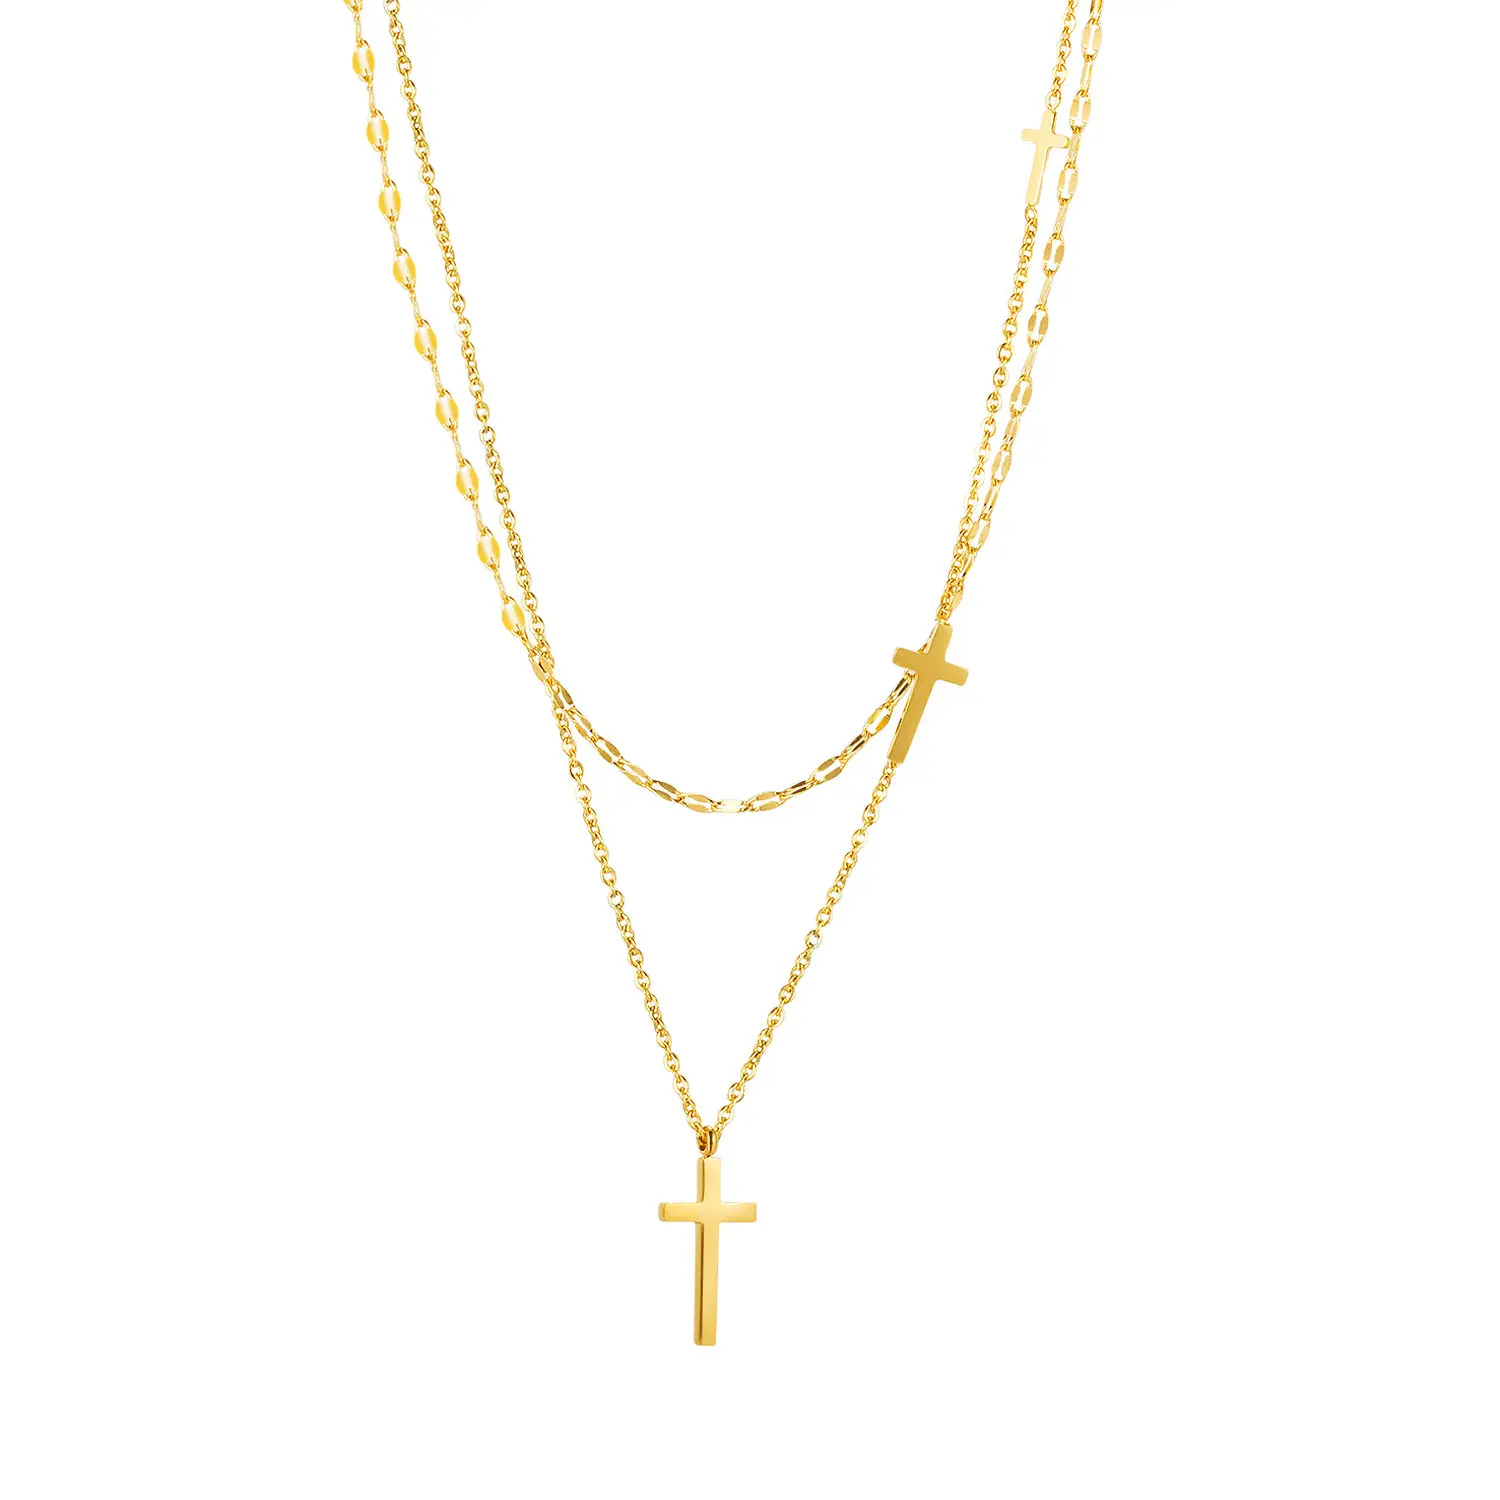 Ins Amazon 18K Gold Plated Minimalist Christian Stainless Steel Double Layered Cross Pendant Necklace For Women Men